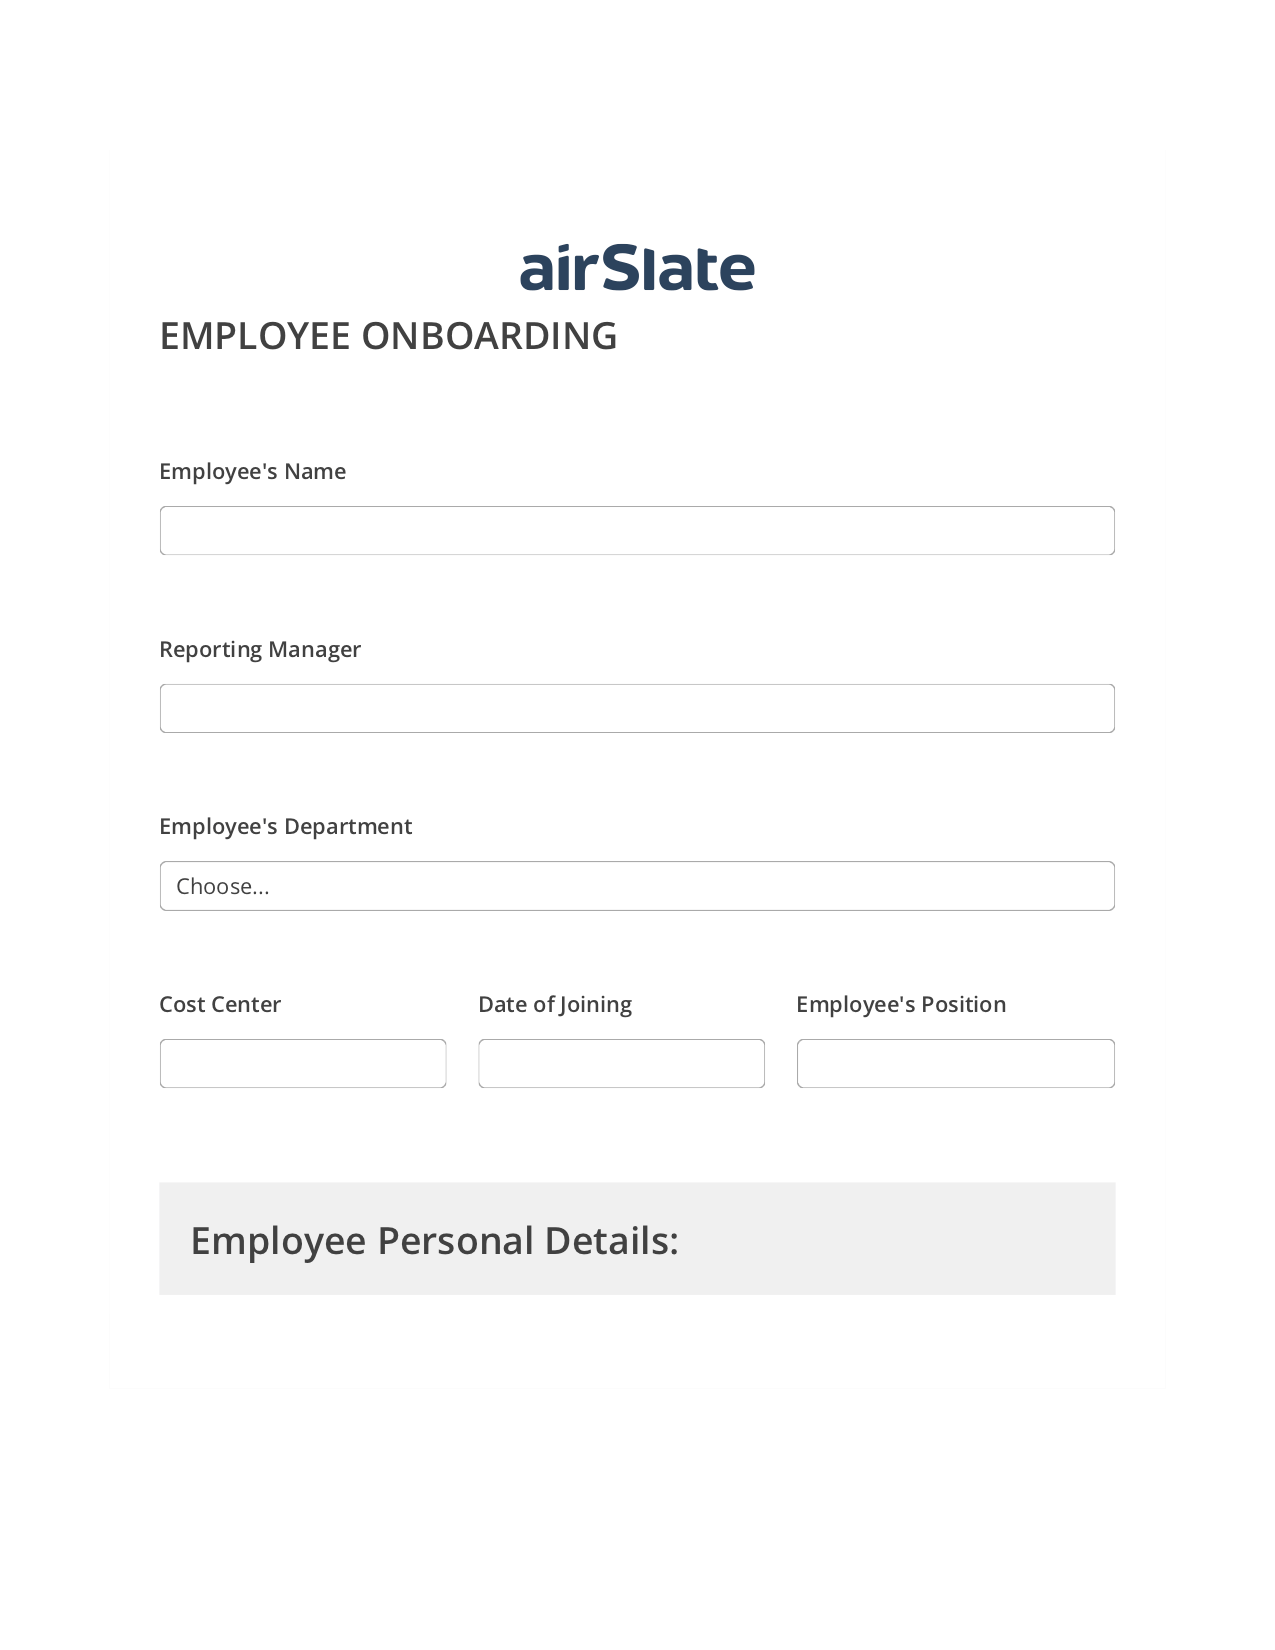 Employee Onboarding Workflow Pre-fill from CSV File Bot, Lock the Slate Bot, Archive to Google Drive Bot